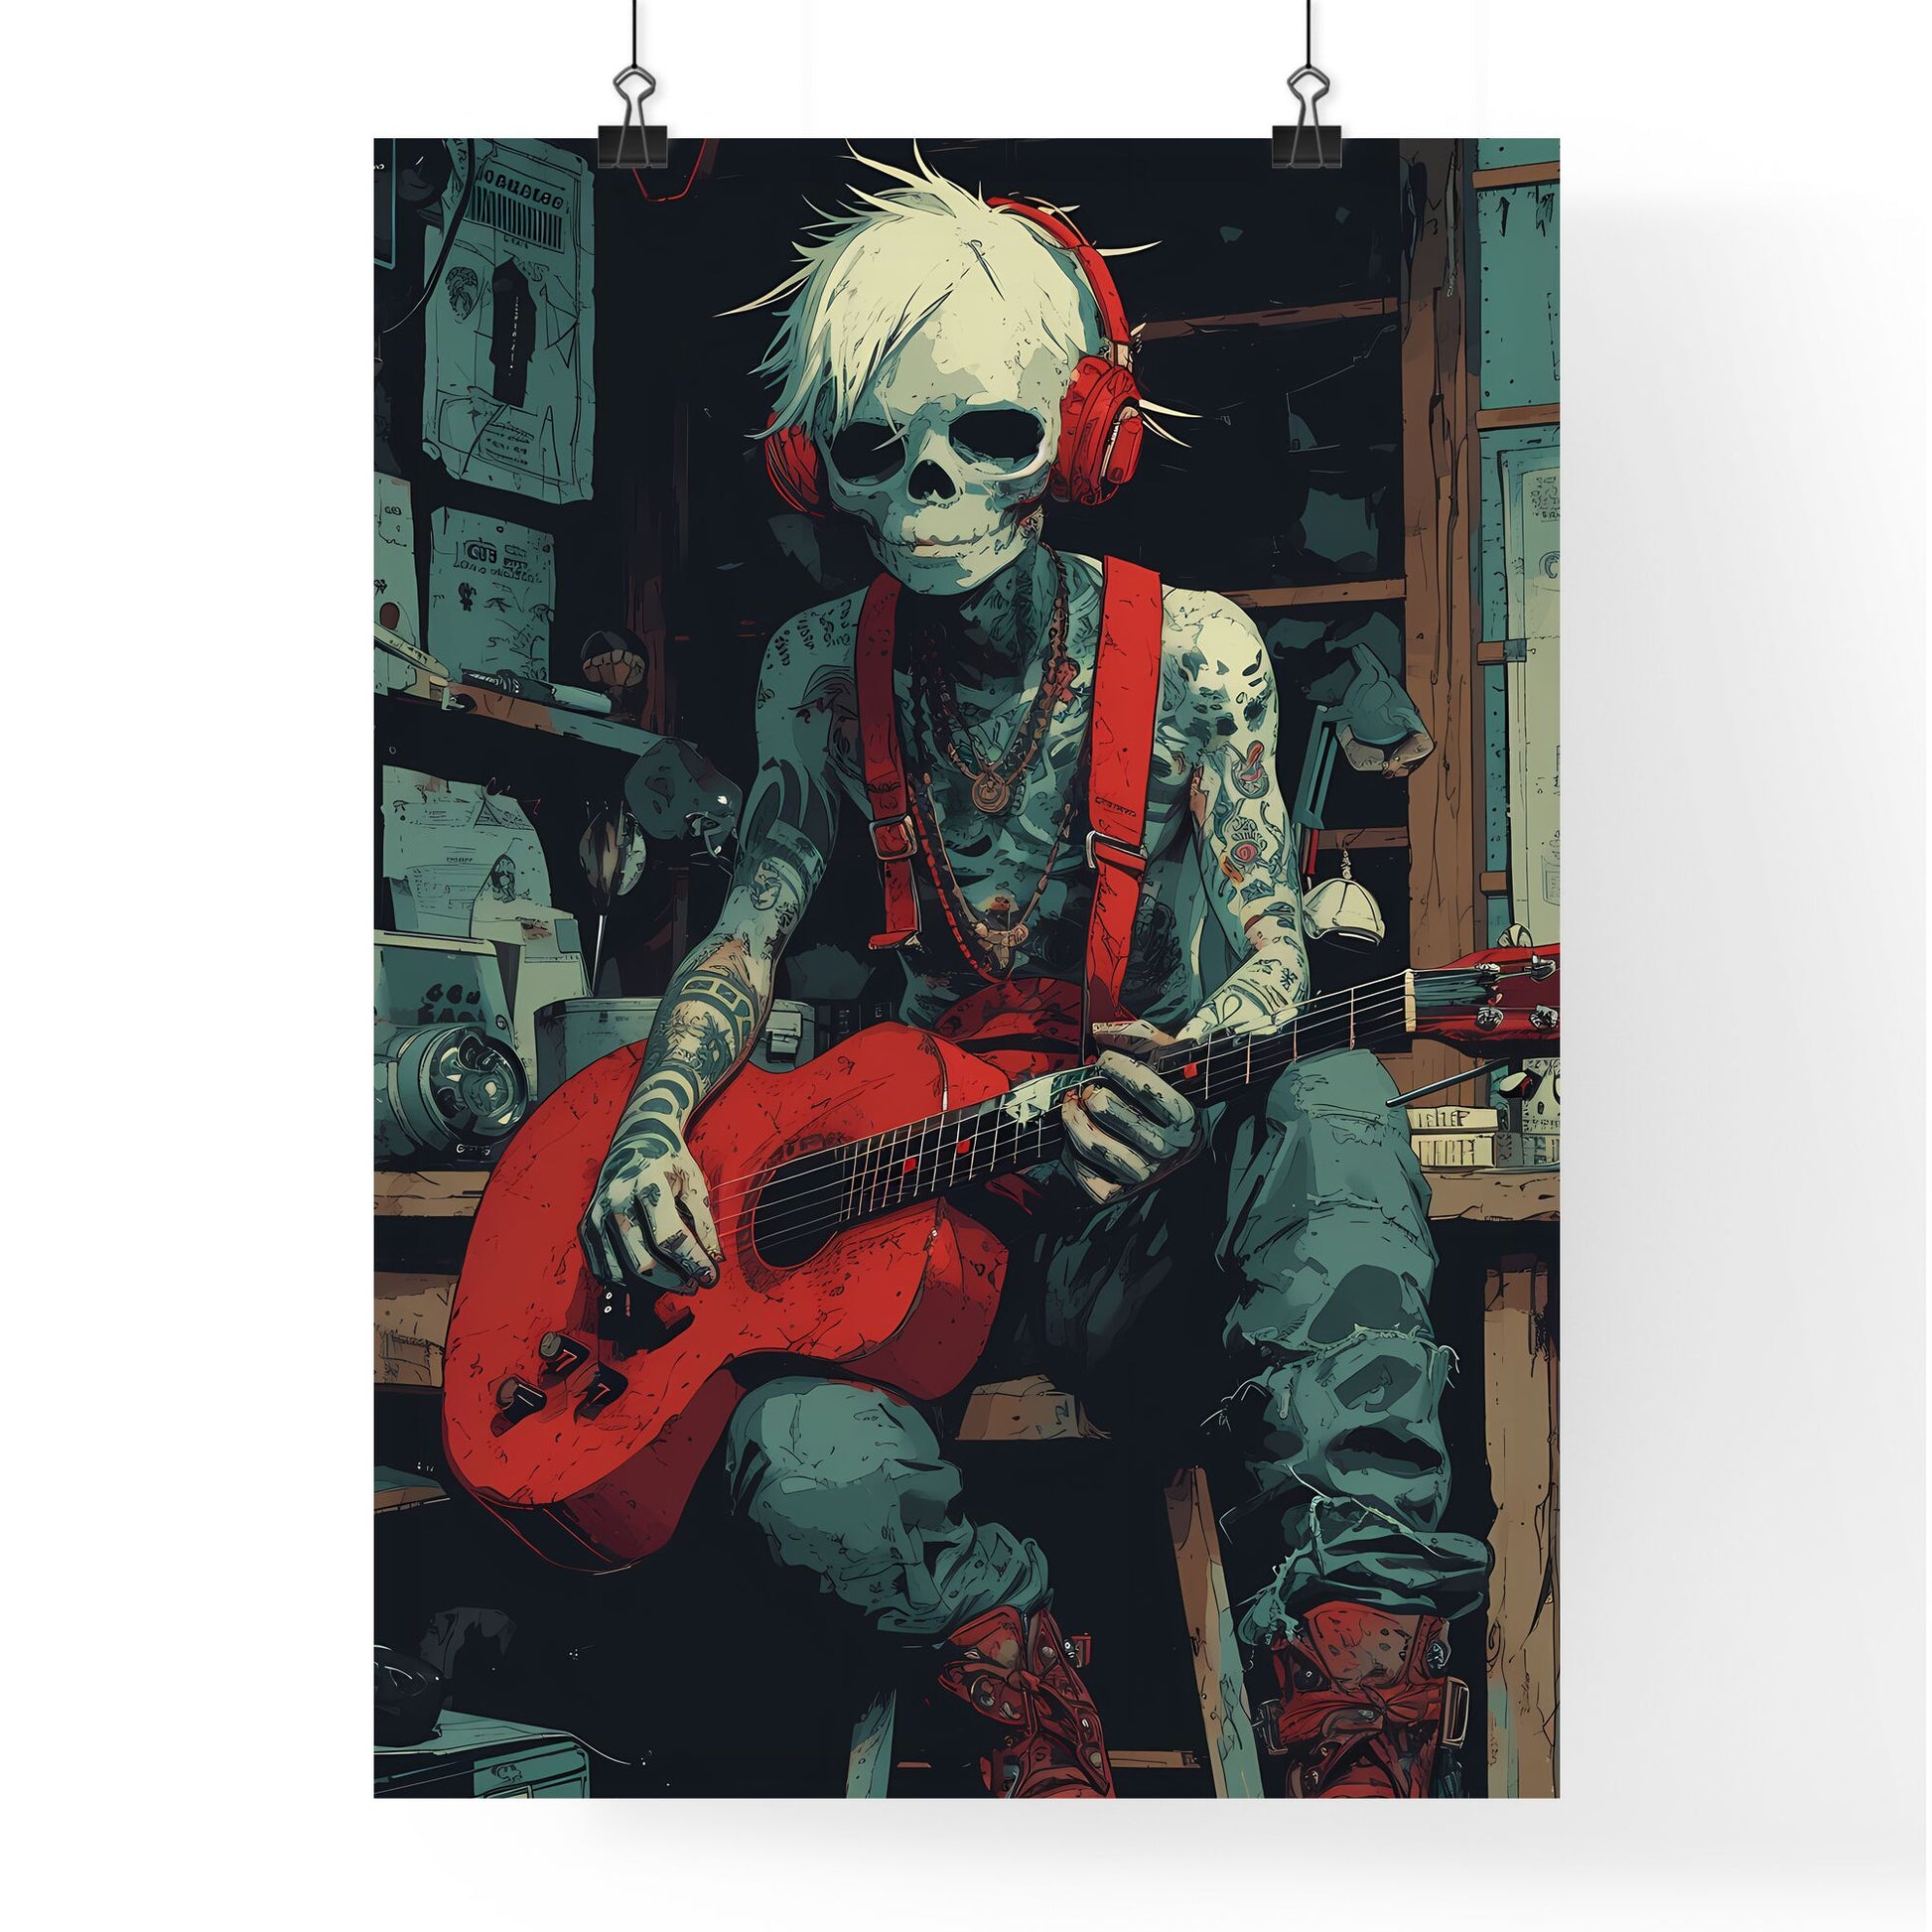 A trendy rocker guy with a pelican case - Art print of a person with skull face and white hair sitting on a desk playing a guitar Default Title